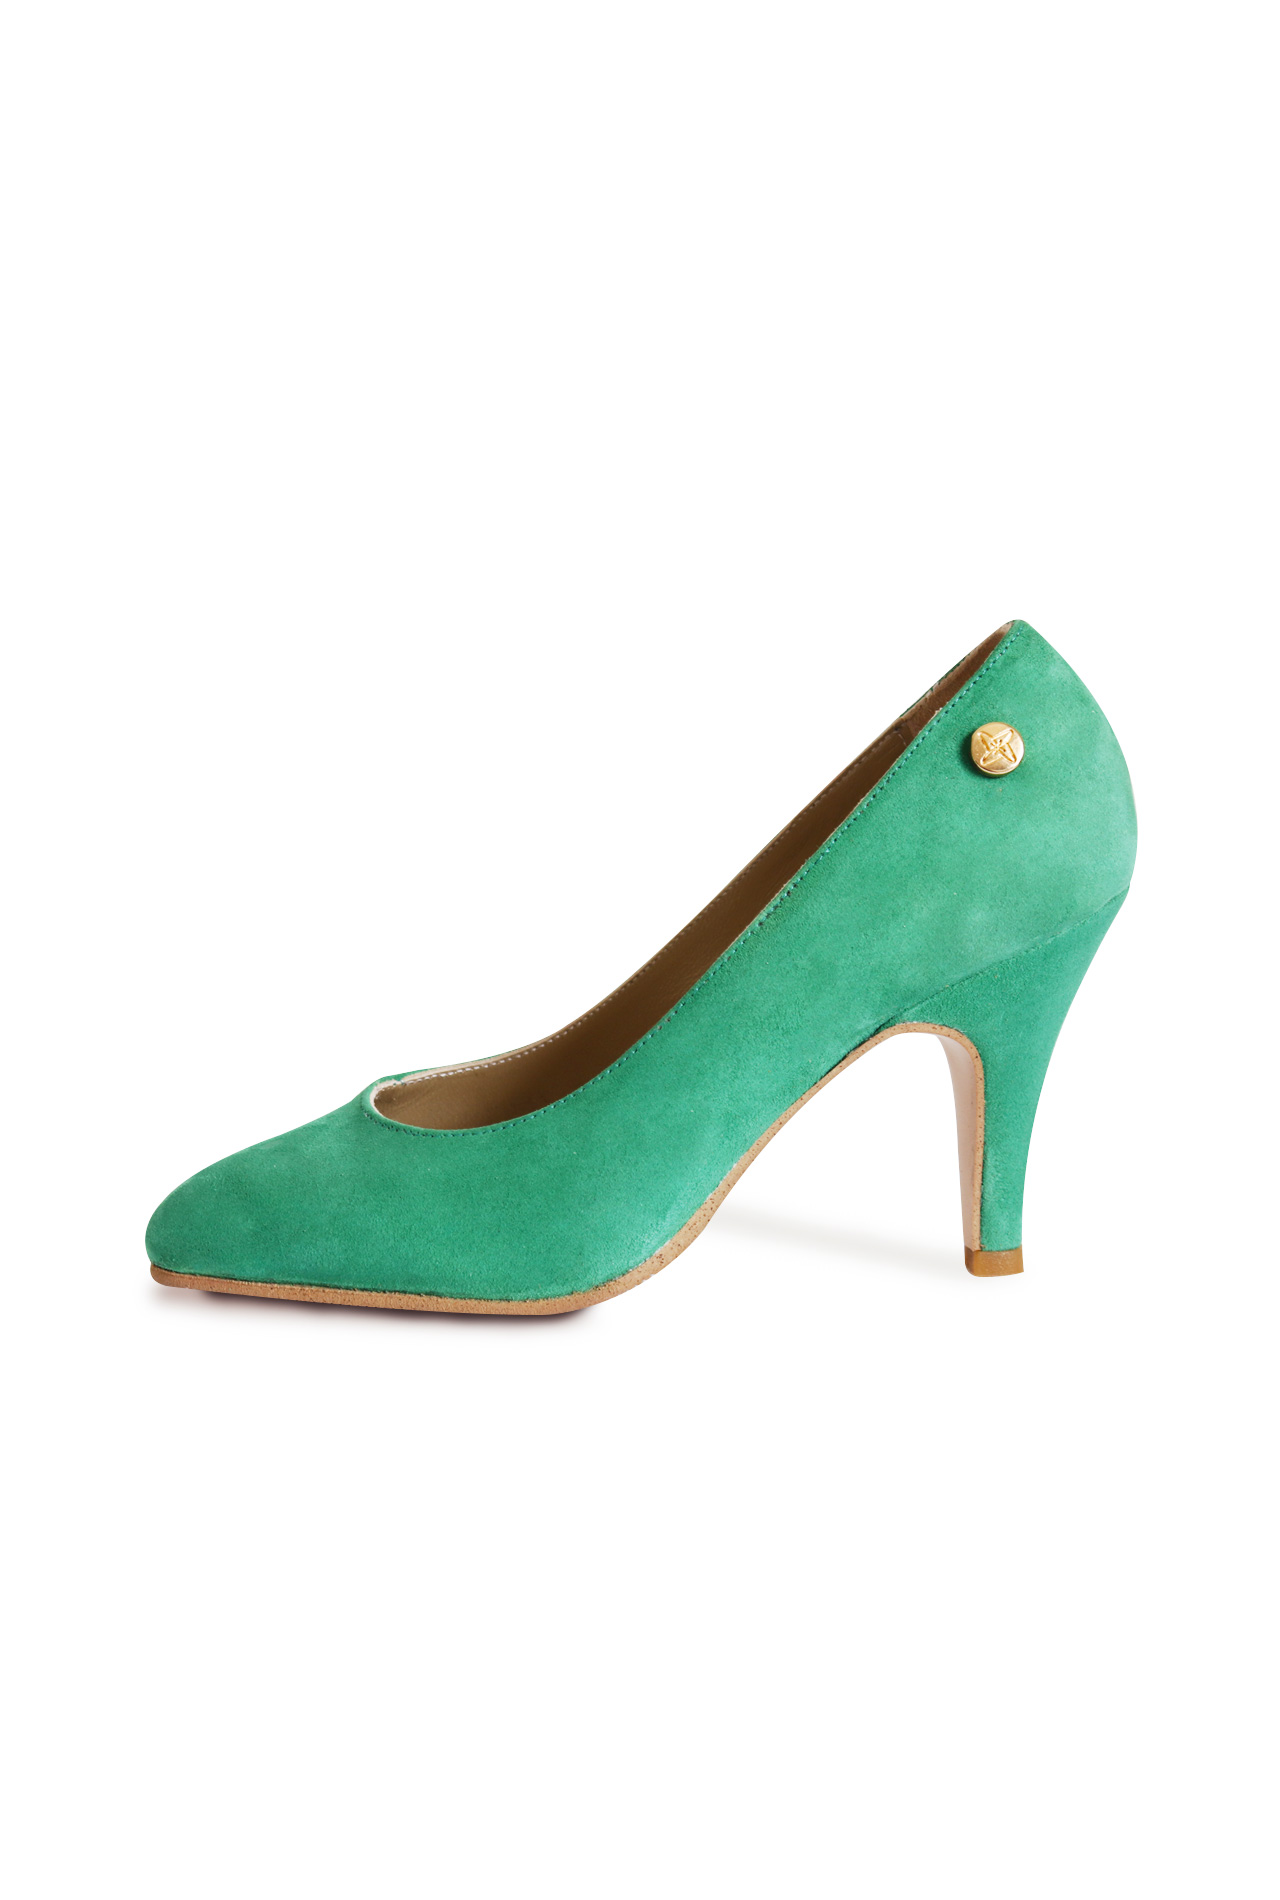 Emerald Green Suede Stilettos for Petites! | Small Shoes by Cristina ...